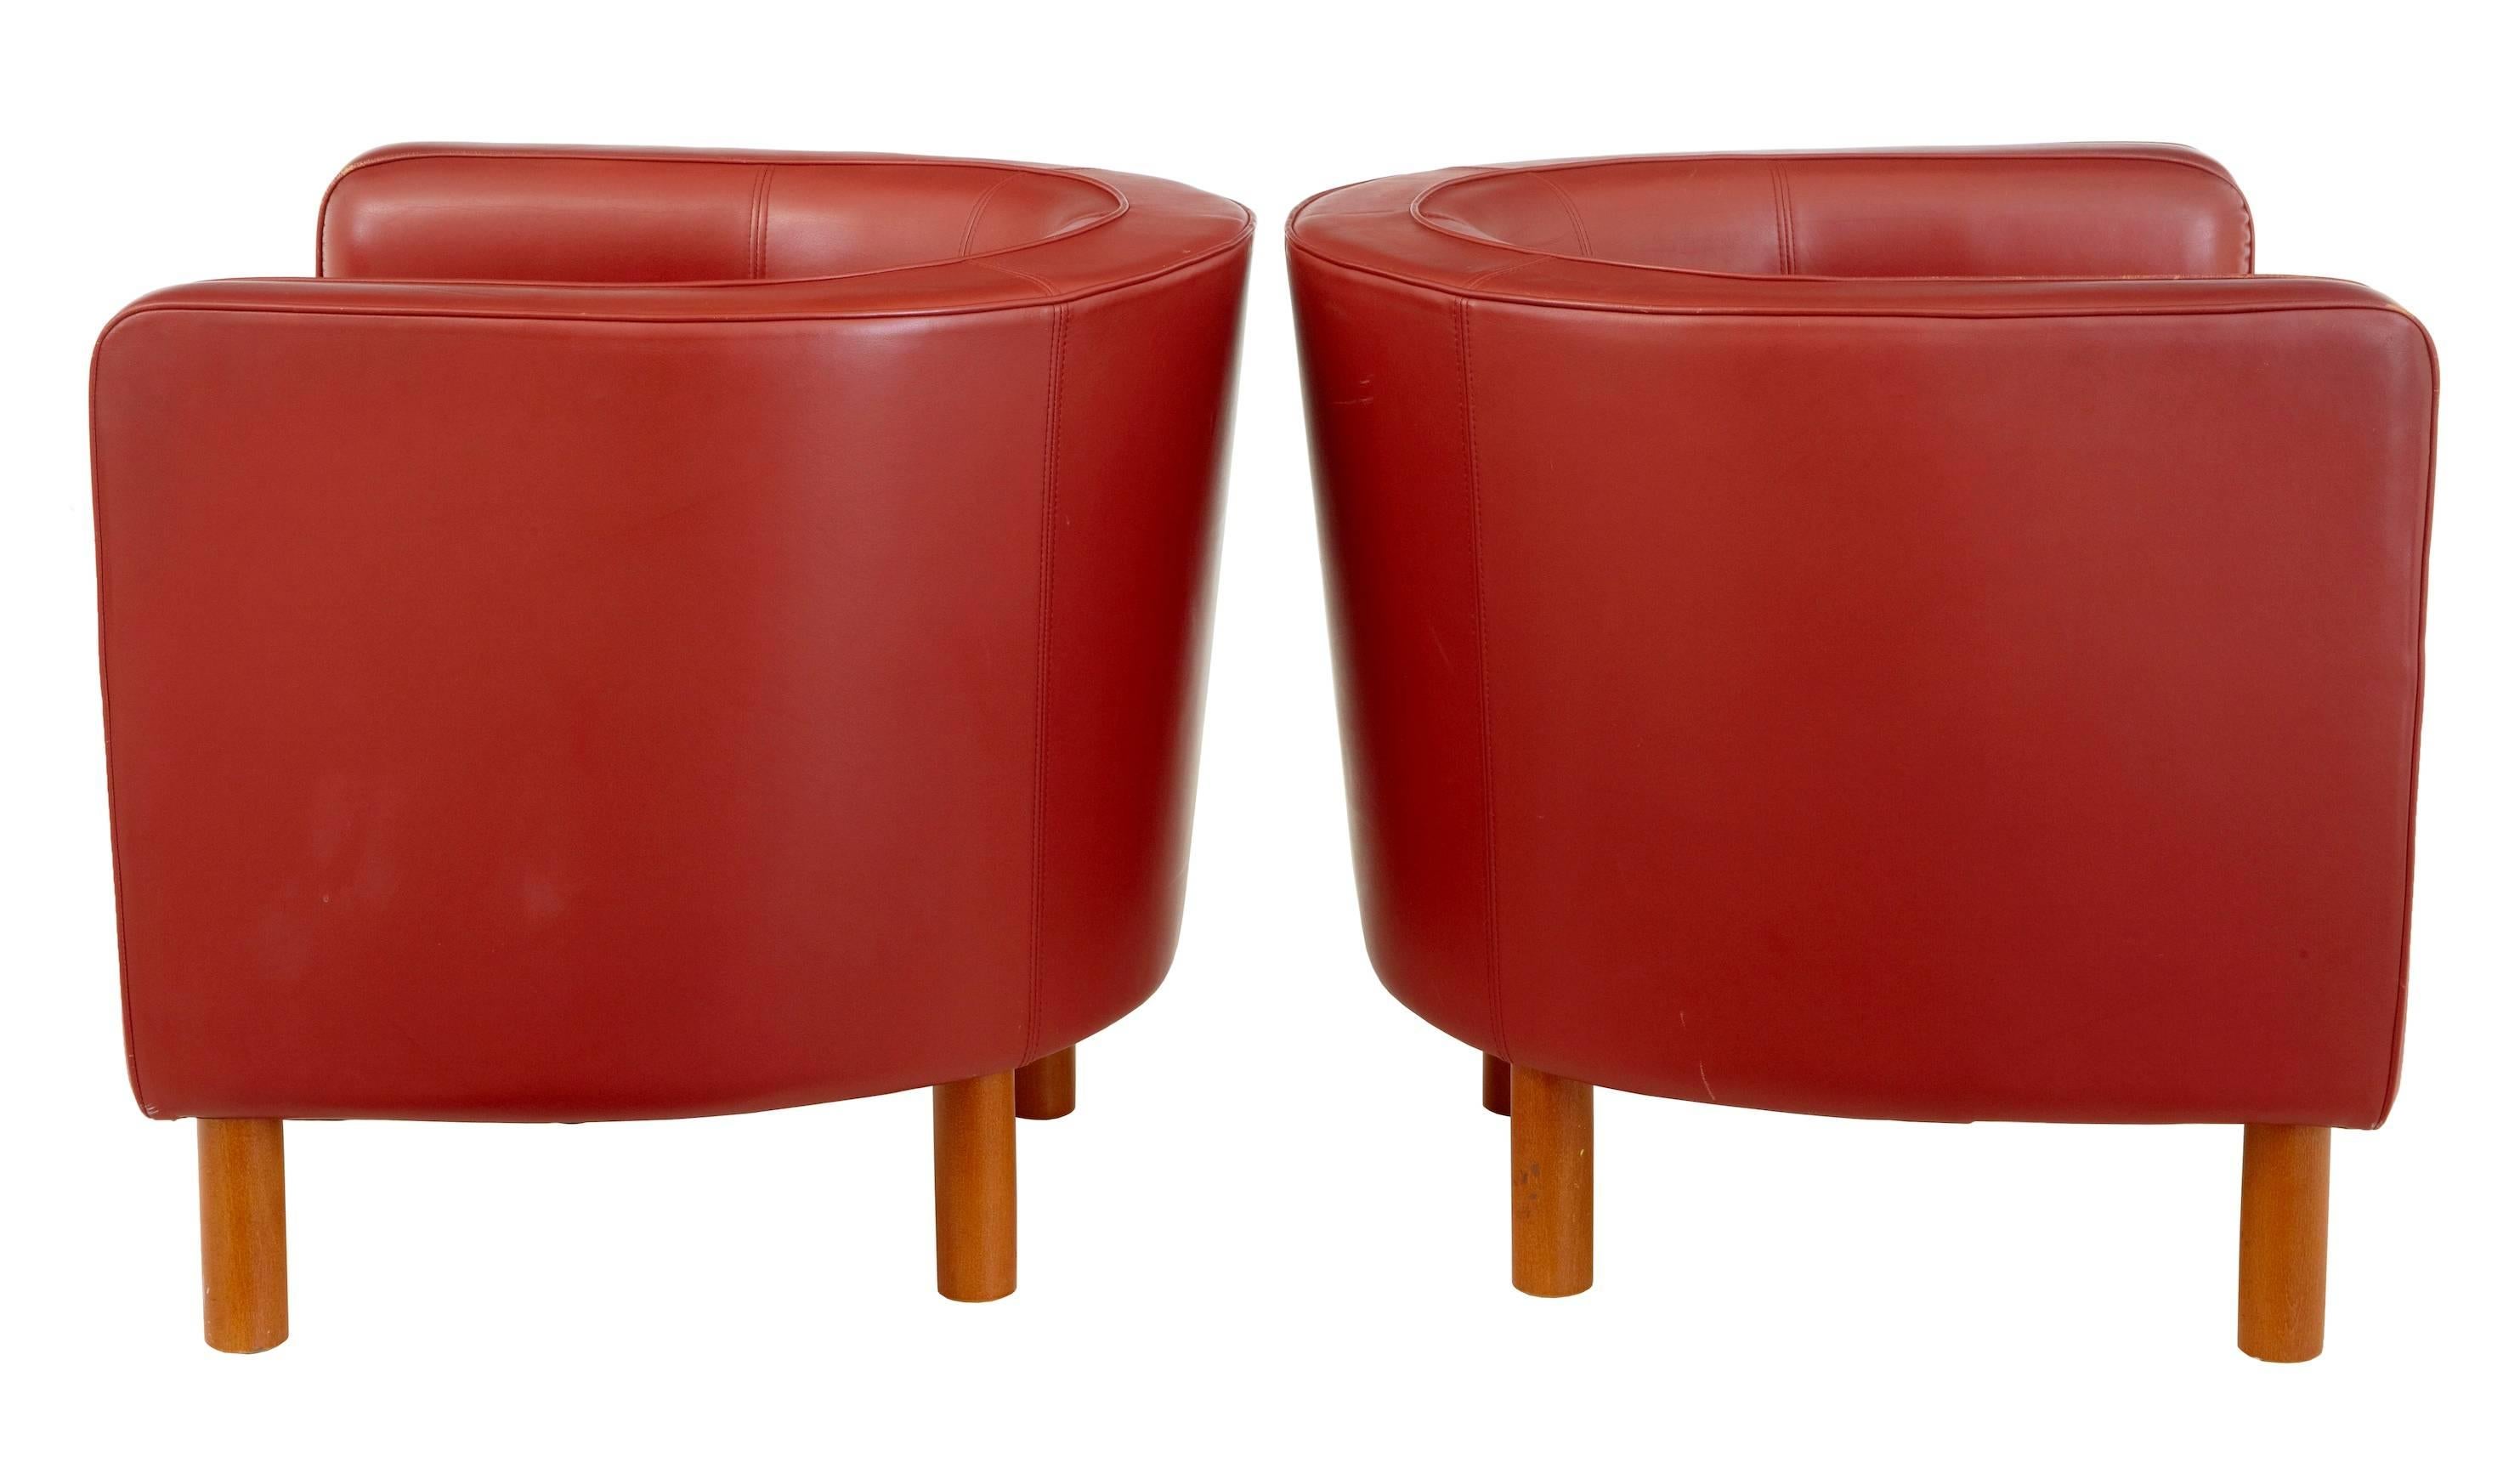 Fine quality leather lounge club armchairs in the Art Deco taste.
Upholstered in rusty red leather.
Beech round legs and exposed front under frame
Very comfortable and stylish.

Some wear to leather piping, one scuff to the side